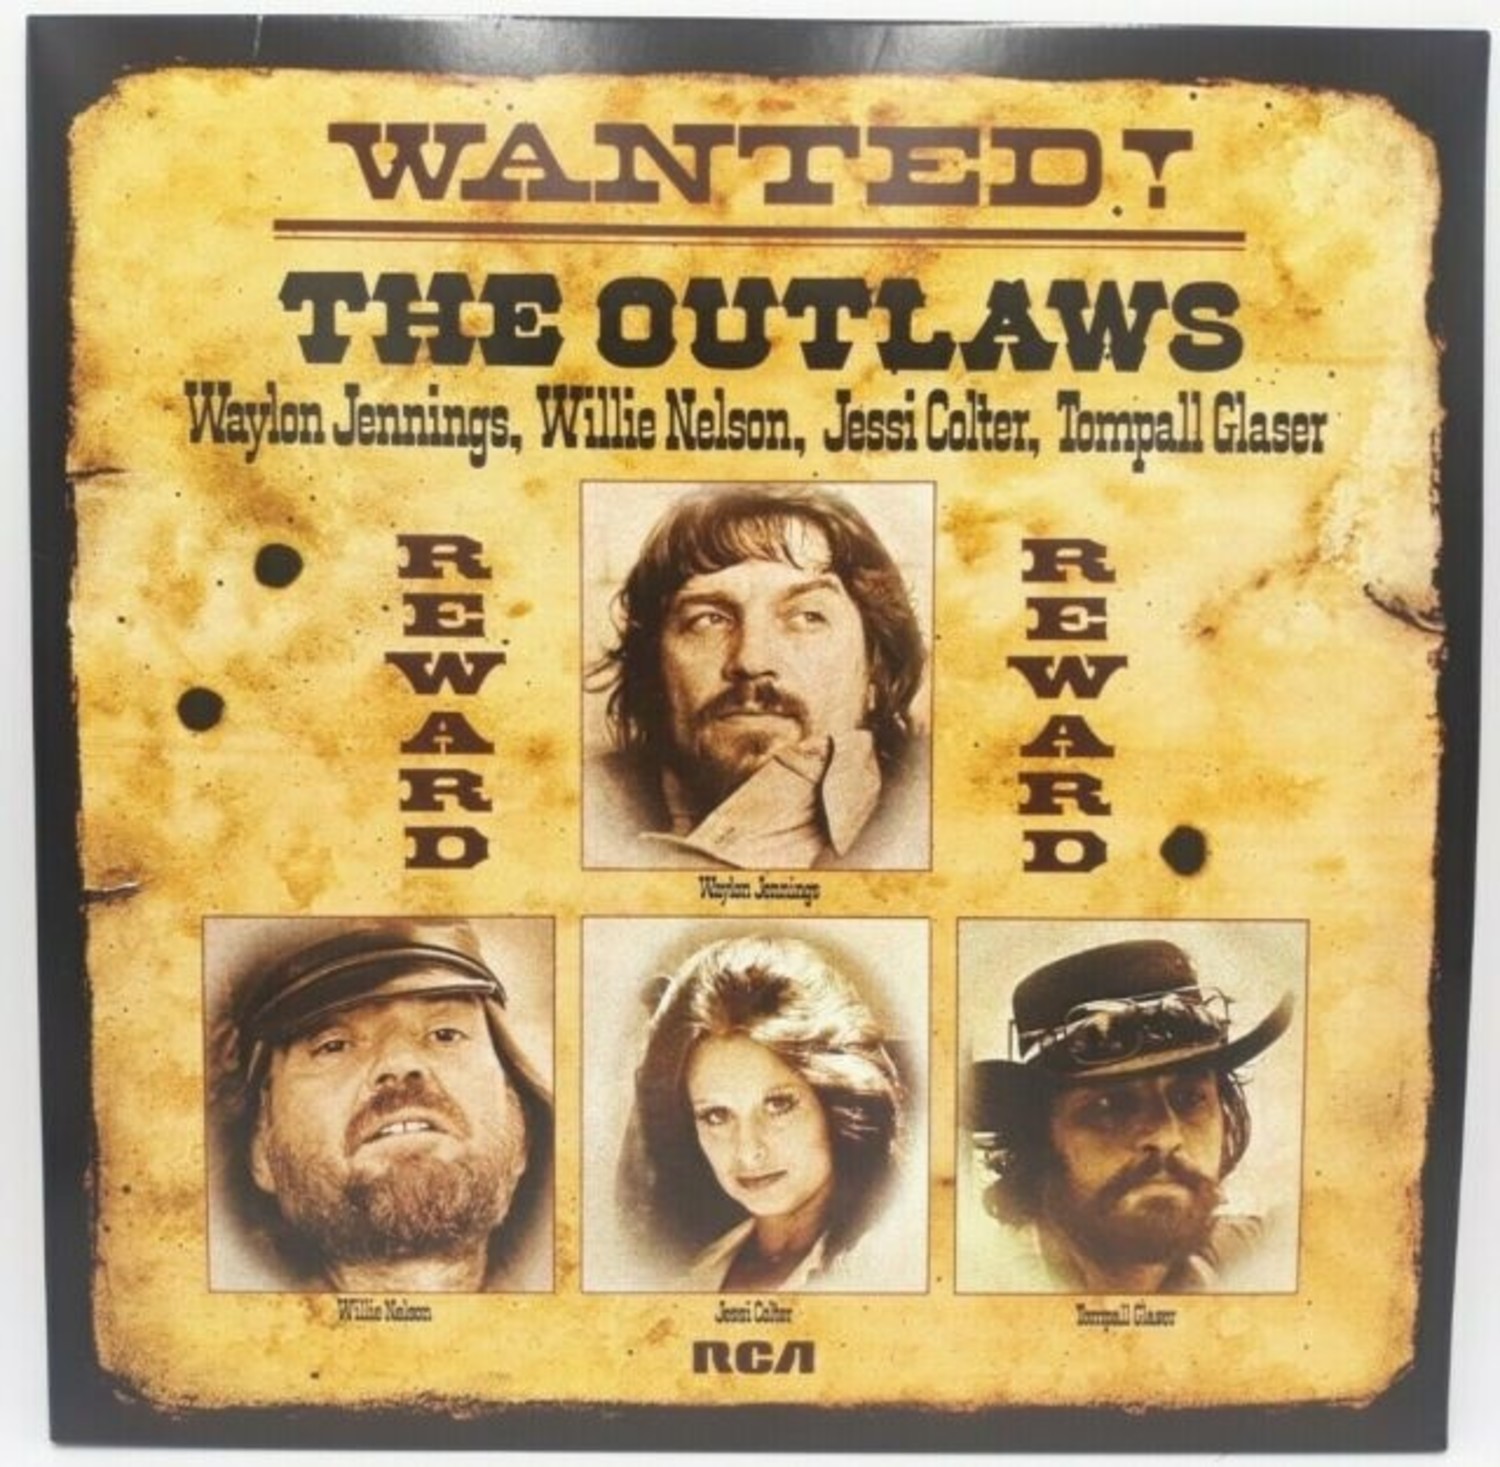 The outlaws